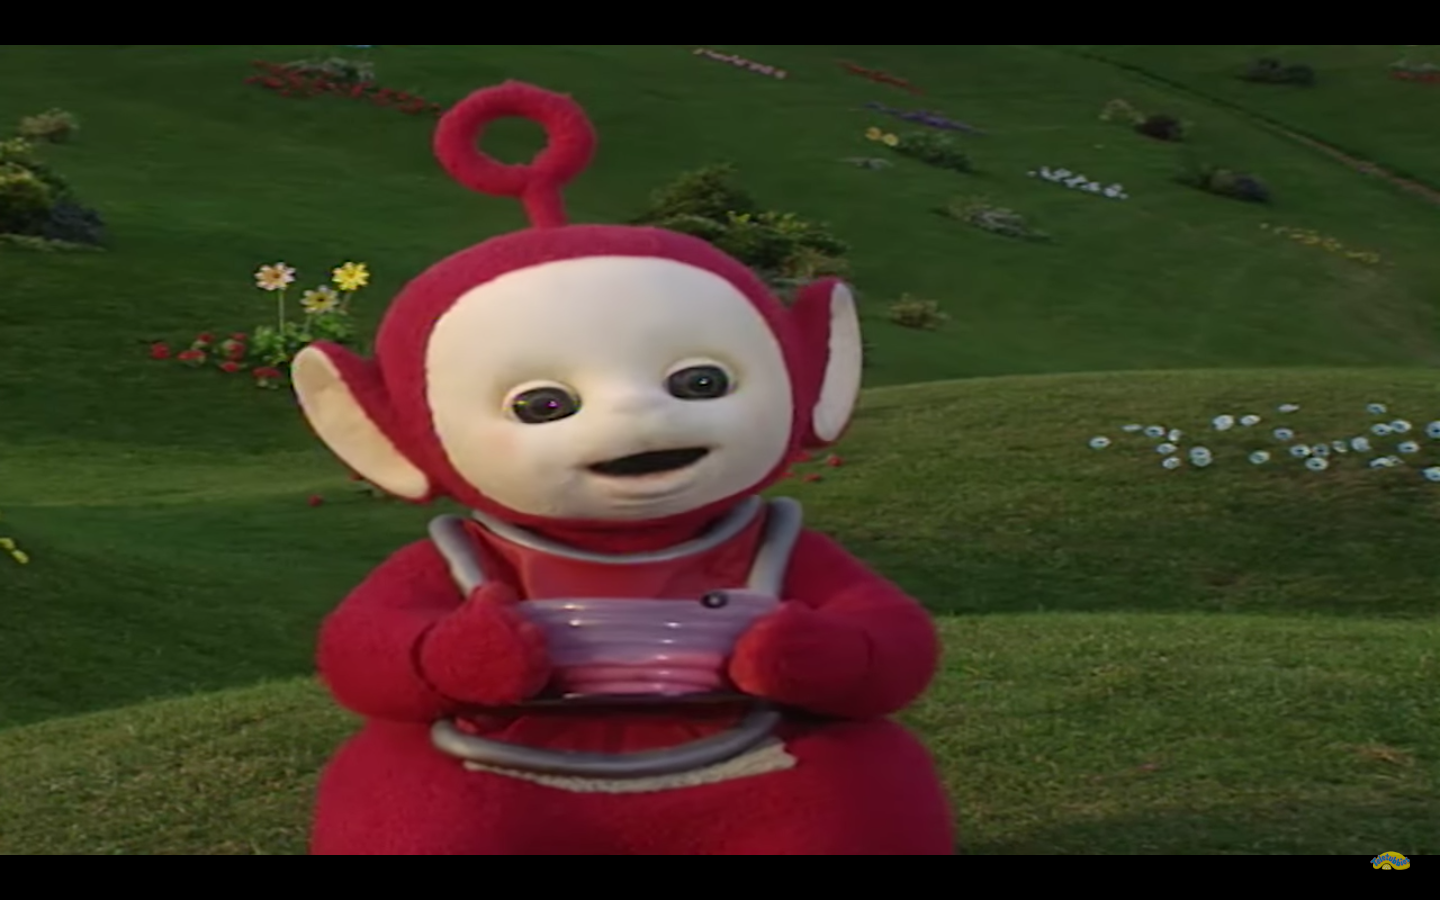 S'poreans freaking out over the revelation that Po (the Teletubby) speaks Cantonese - Mothership.SG - News Singapore, Asia and around the world